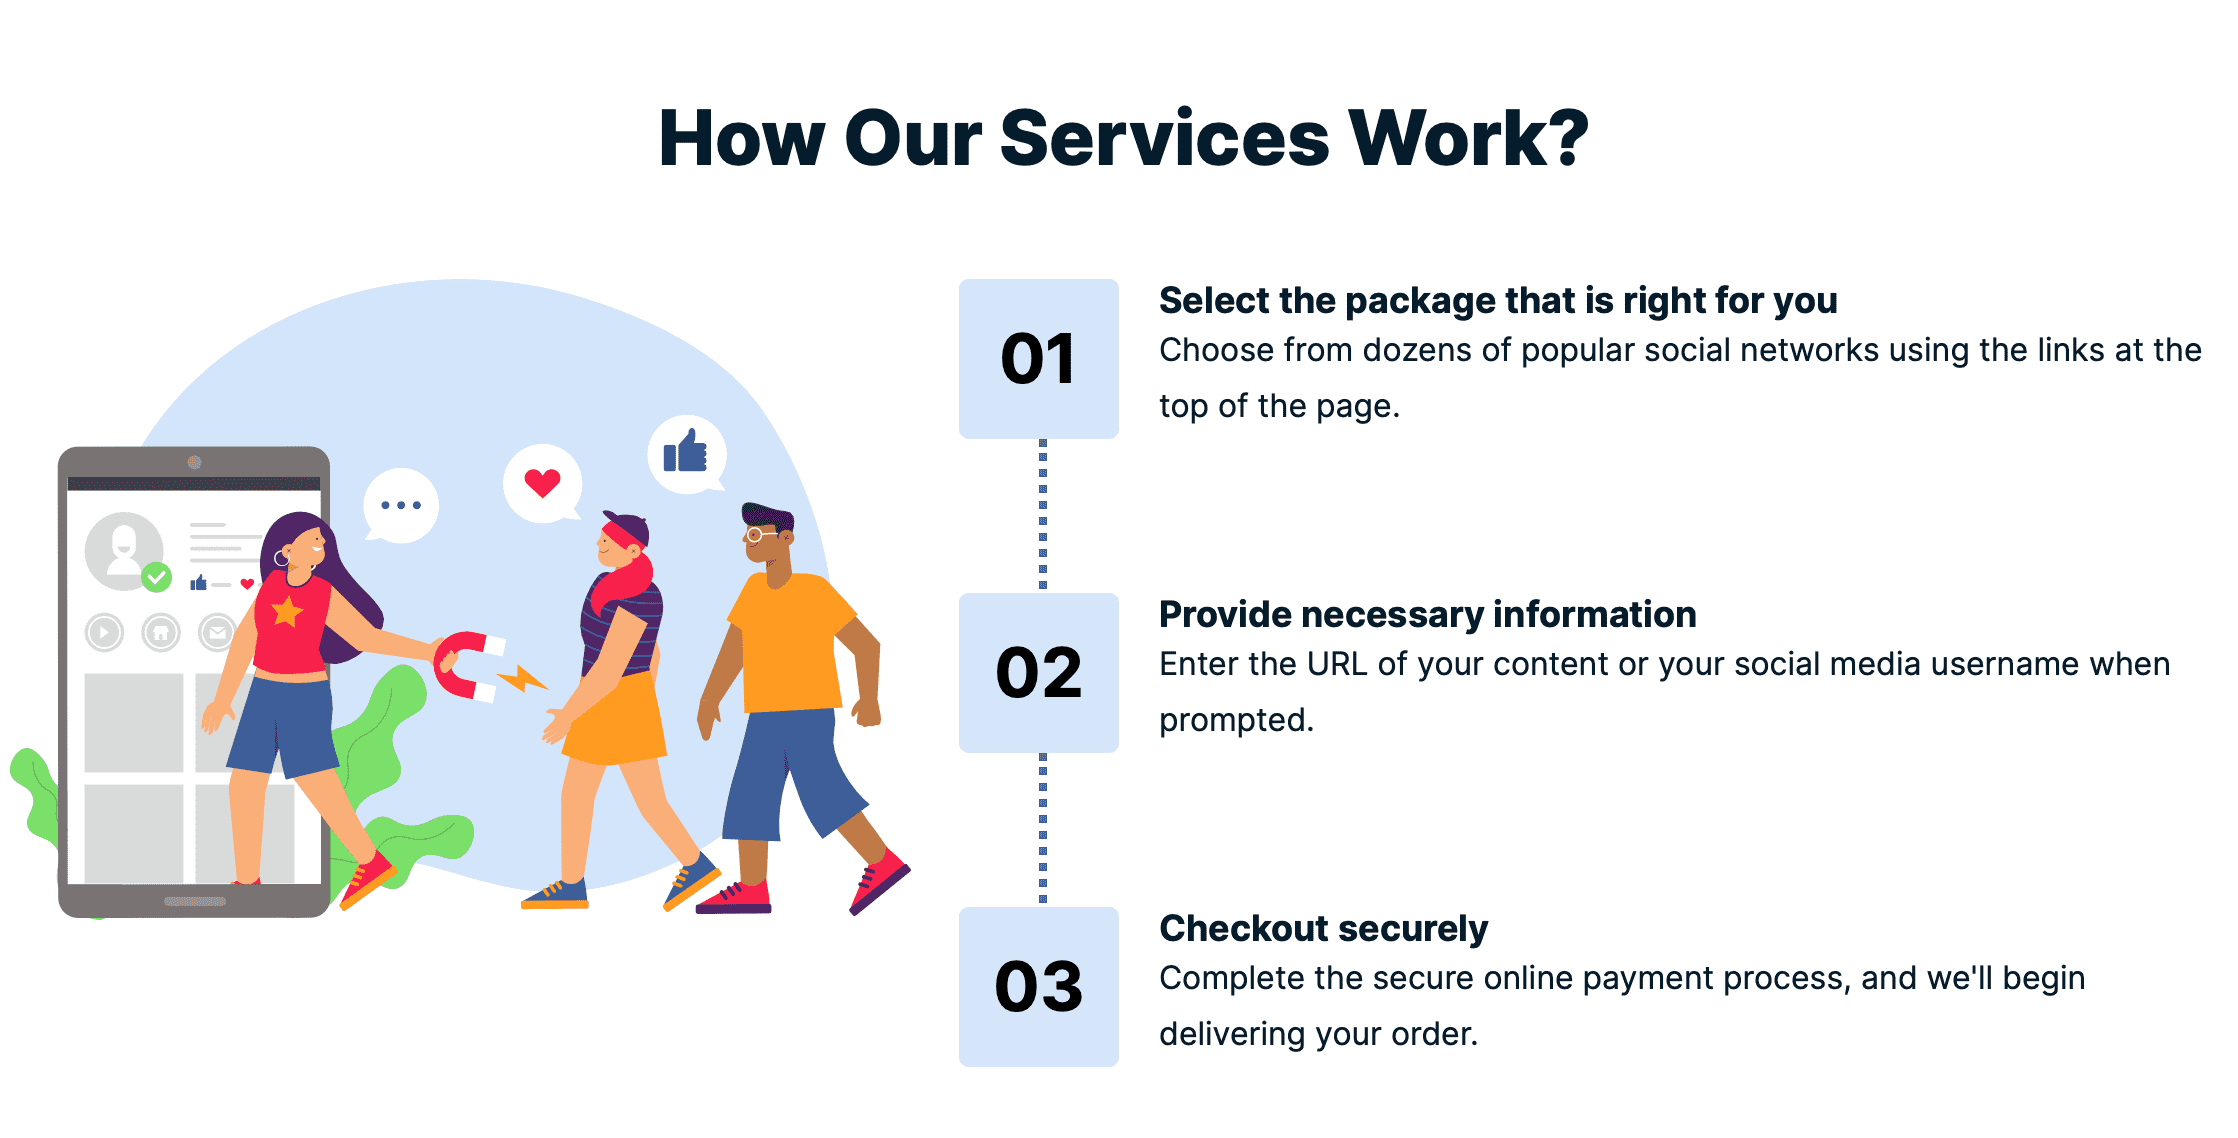 How Our Services Work?